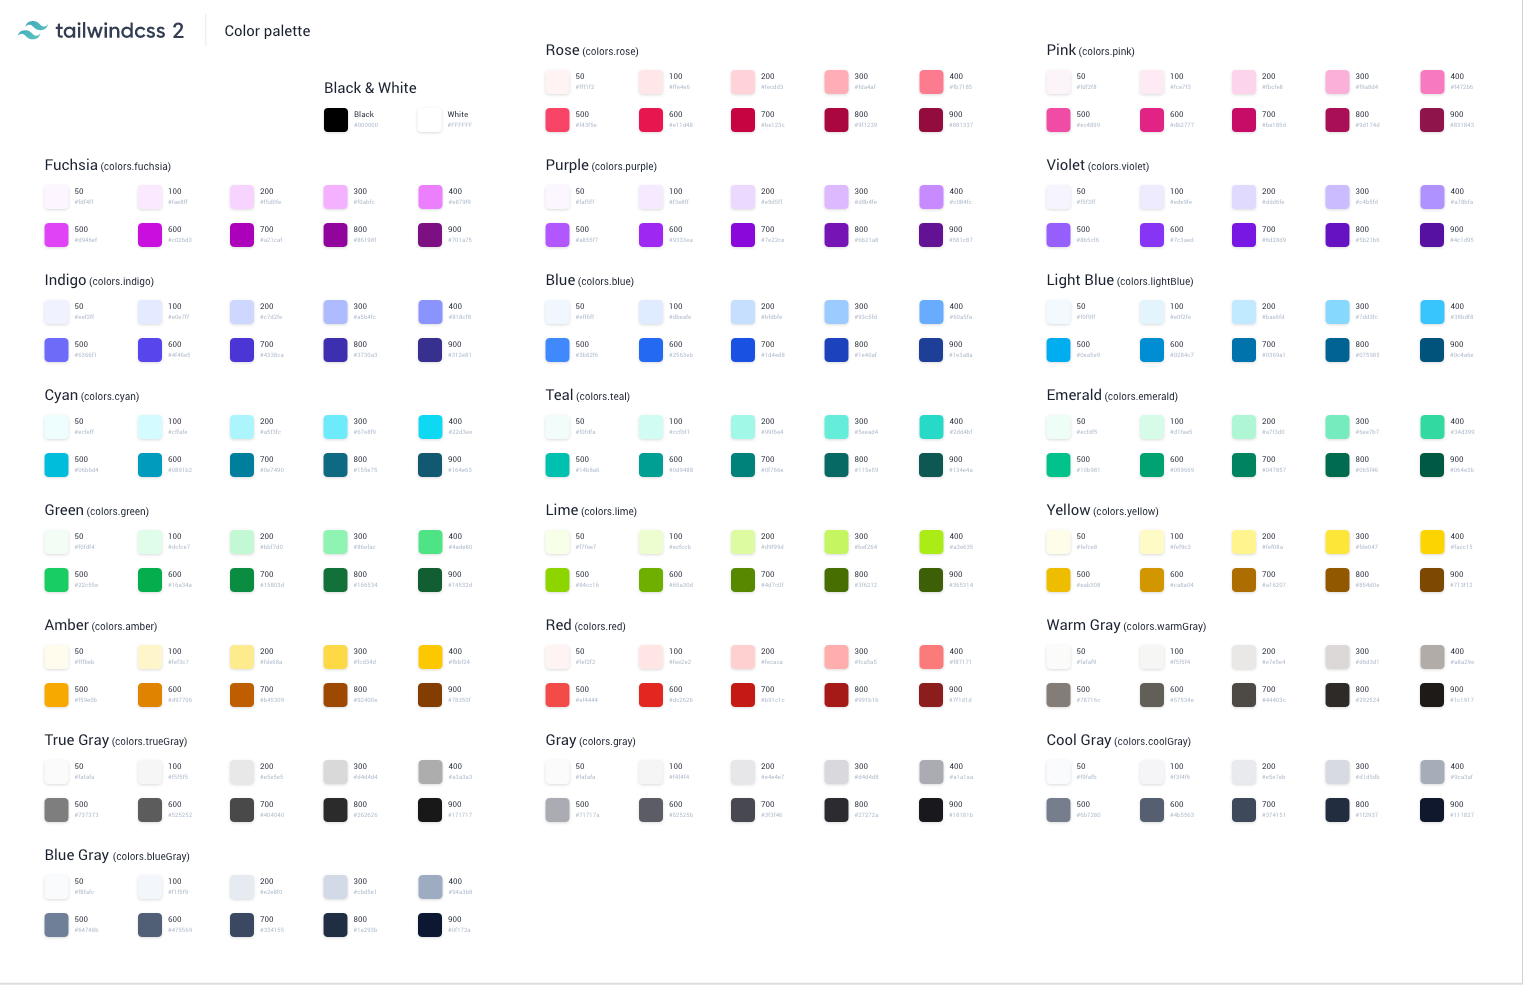 Tailwindcss 2 color palette for Adobe XD